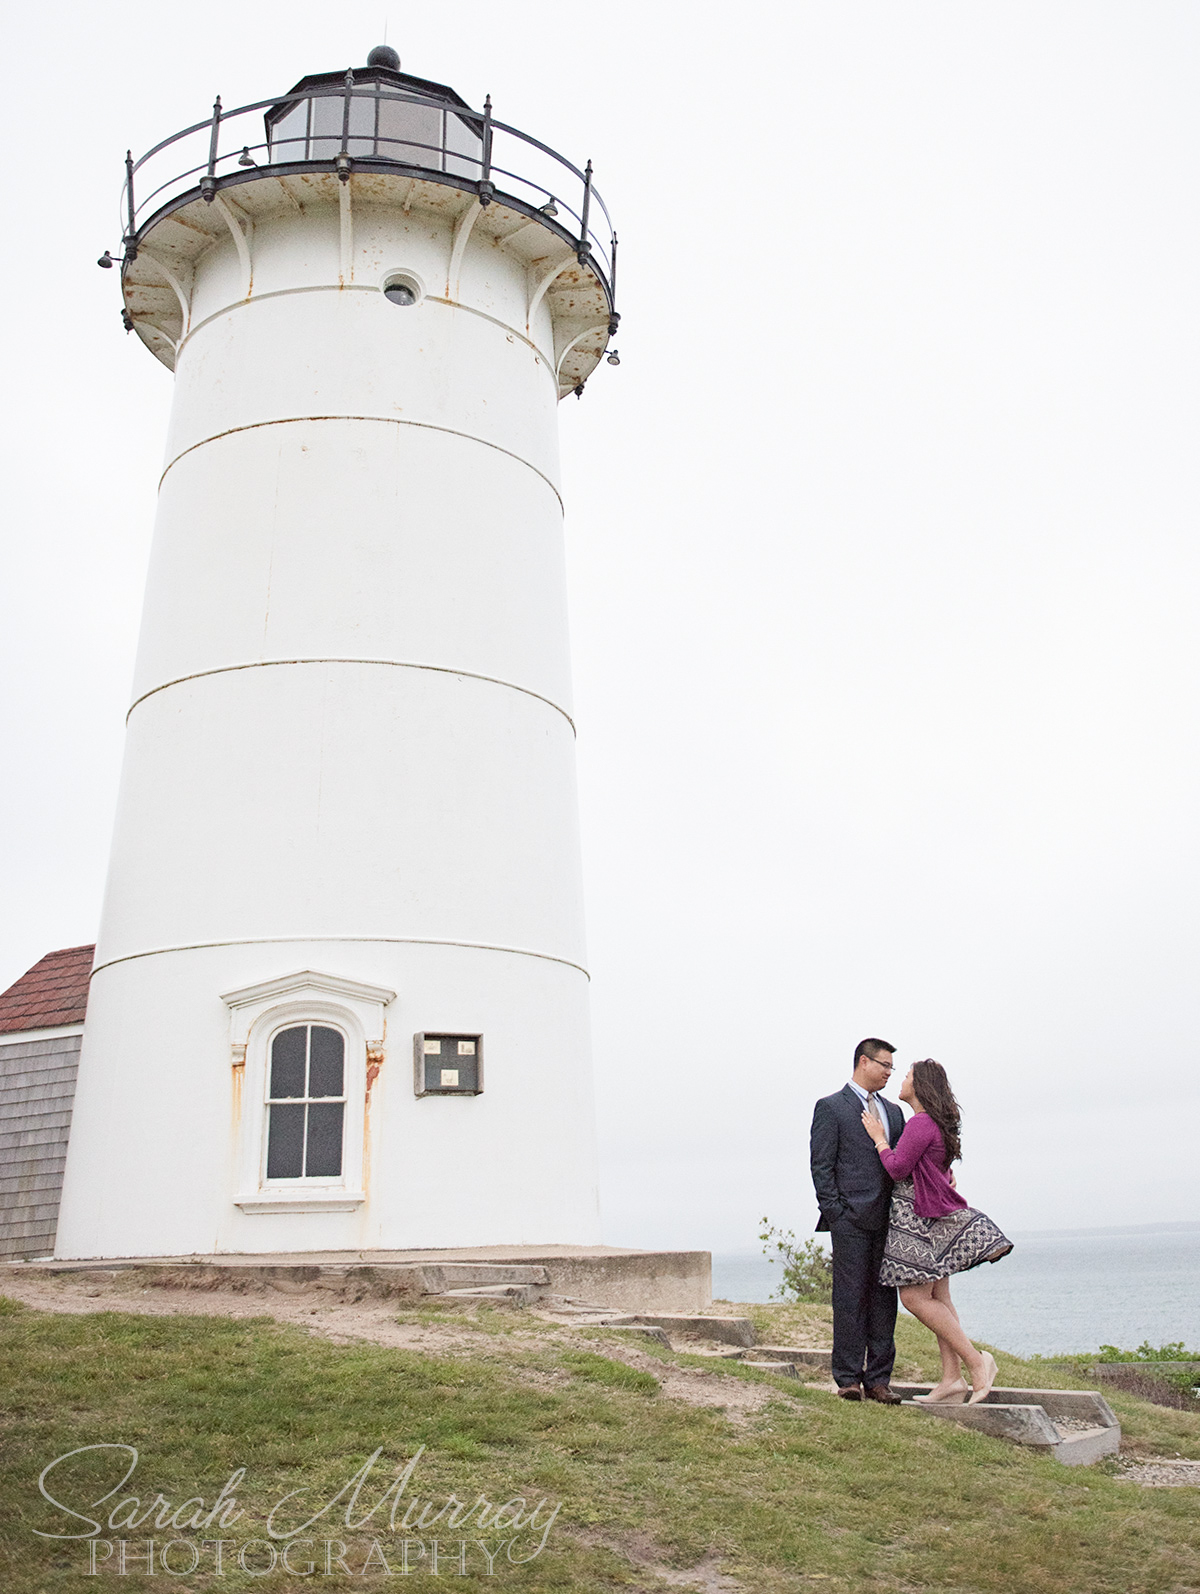 Nobska Lighthouse Beach Cape Cod Engagement Session in Falmouth, Massachusetts - Sarah Murray Photography